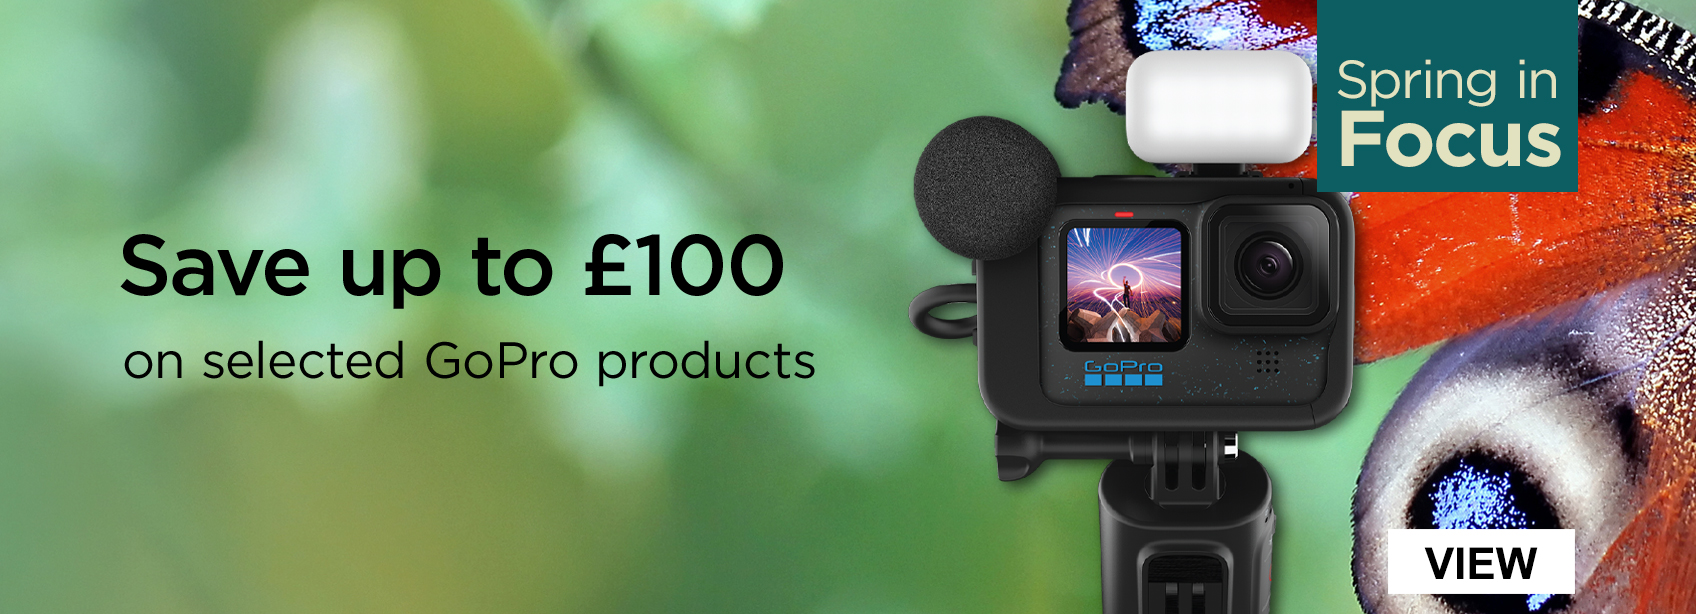 Save up to £100 on selected GoPro products